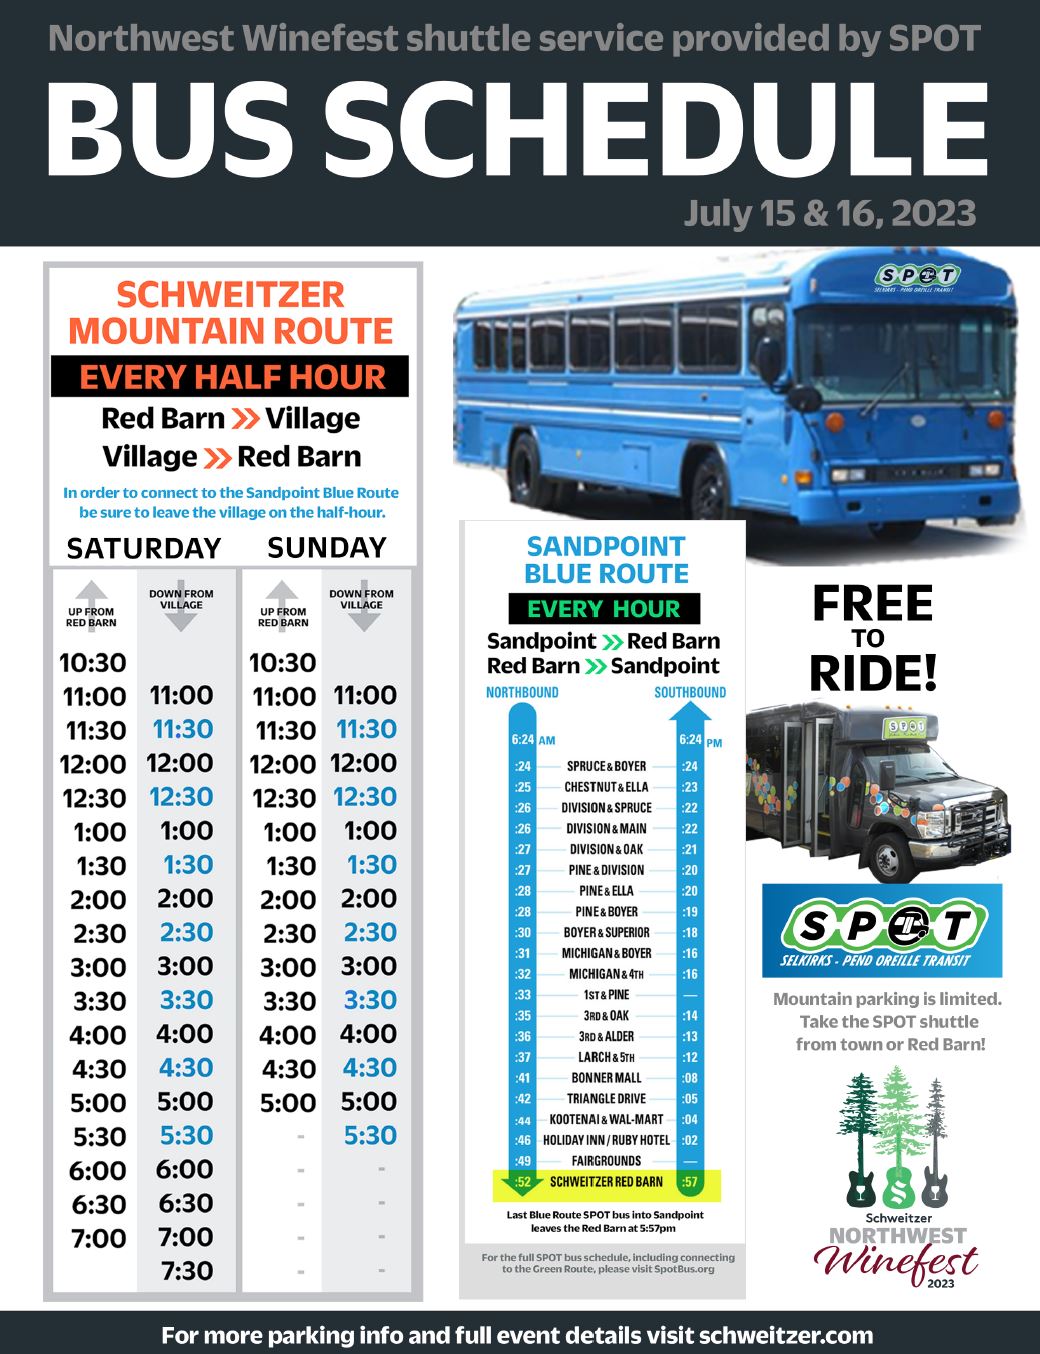 Image of a bus schedule